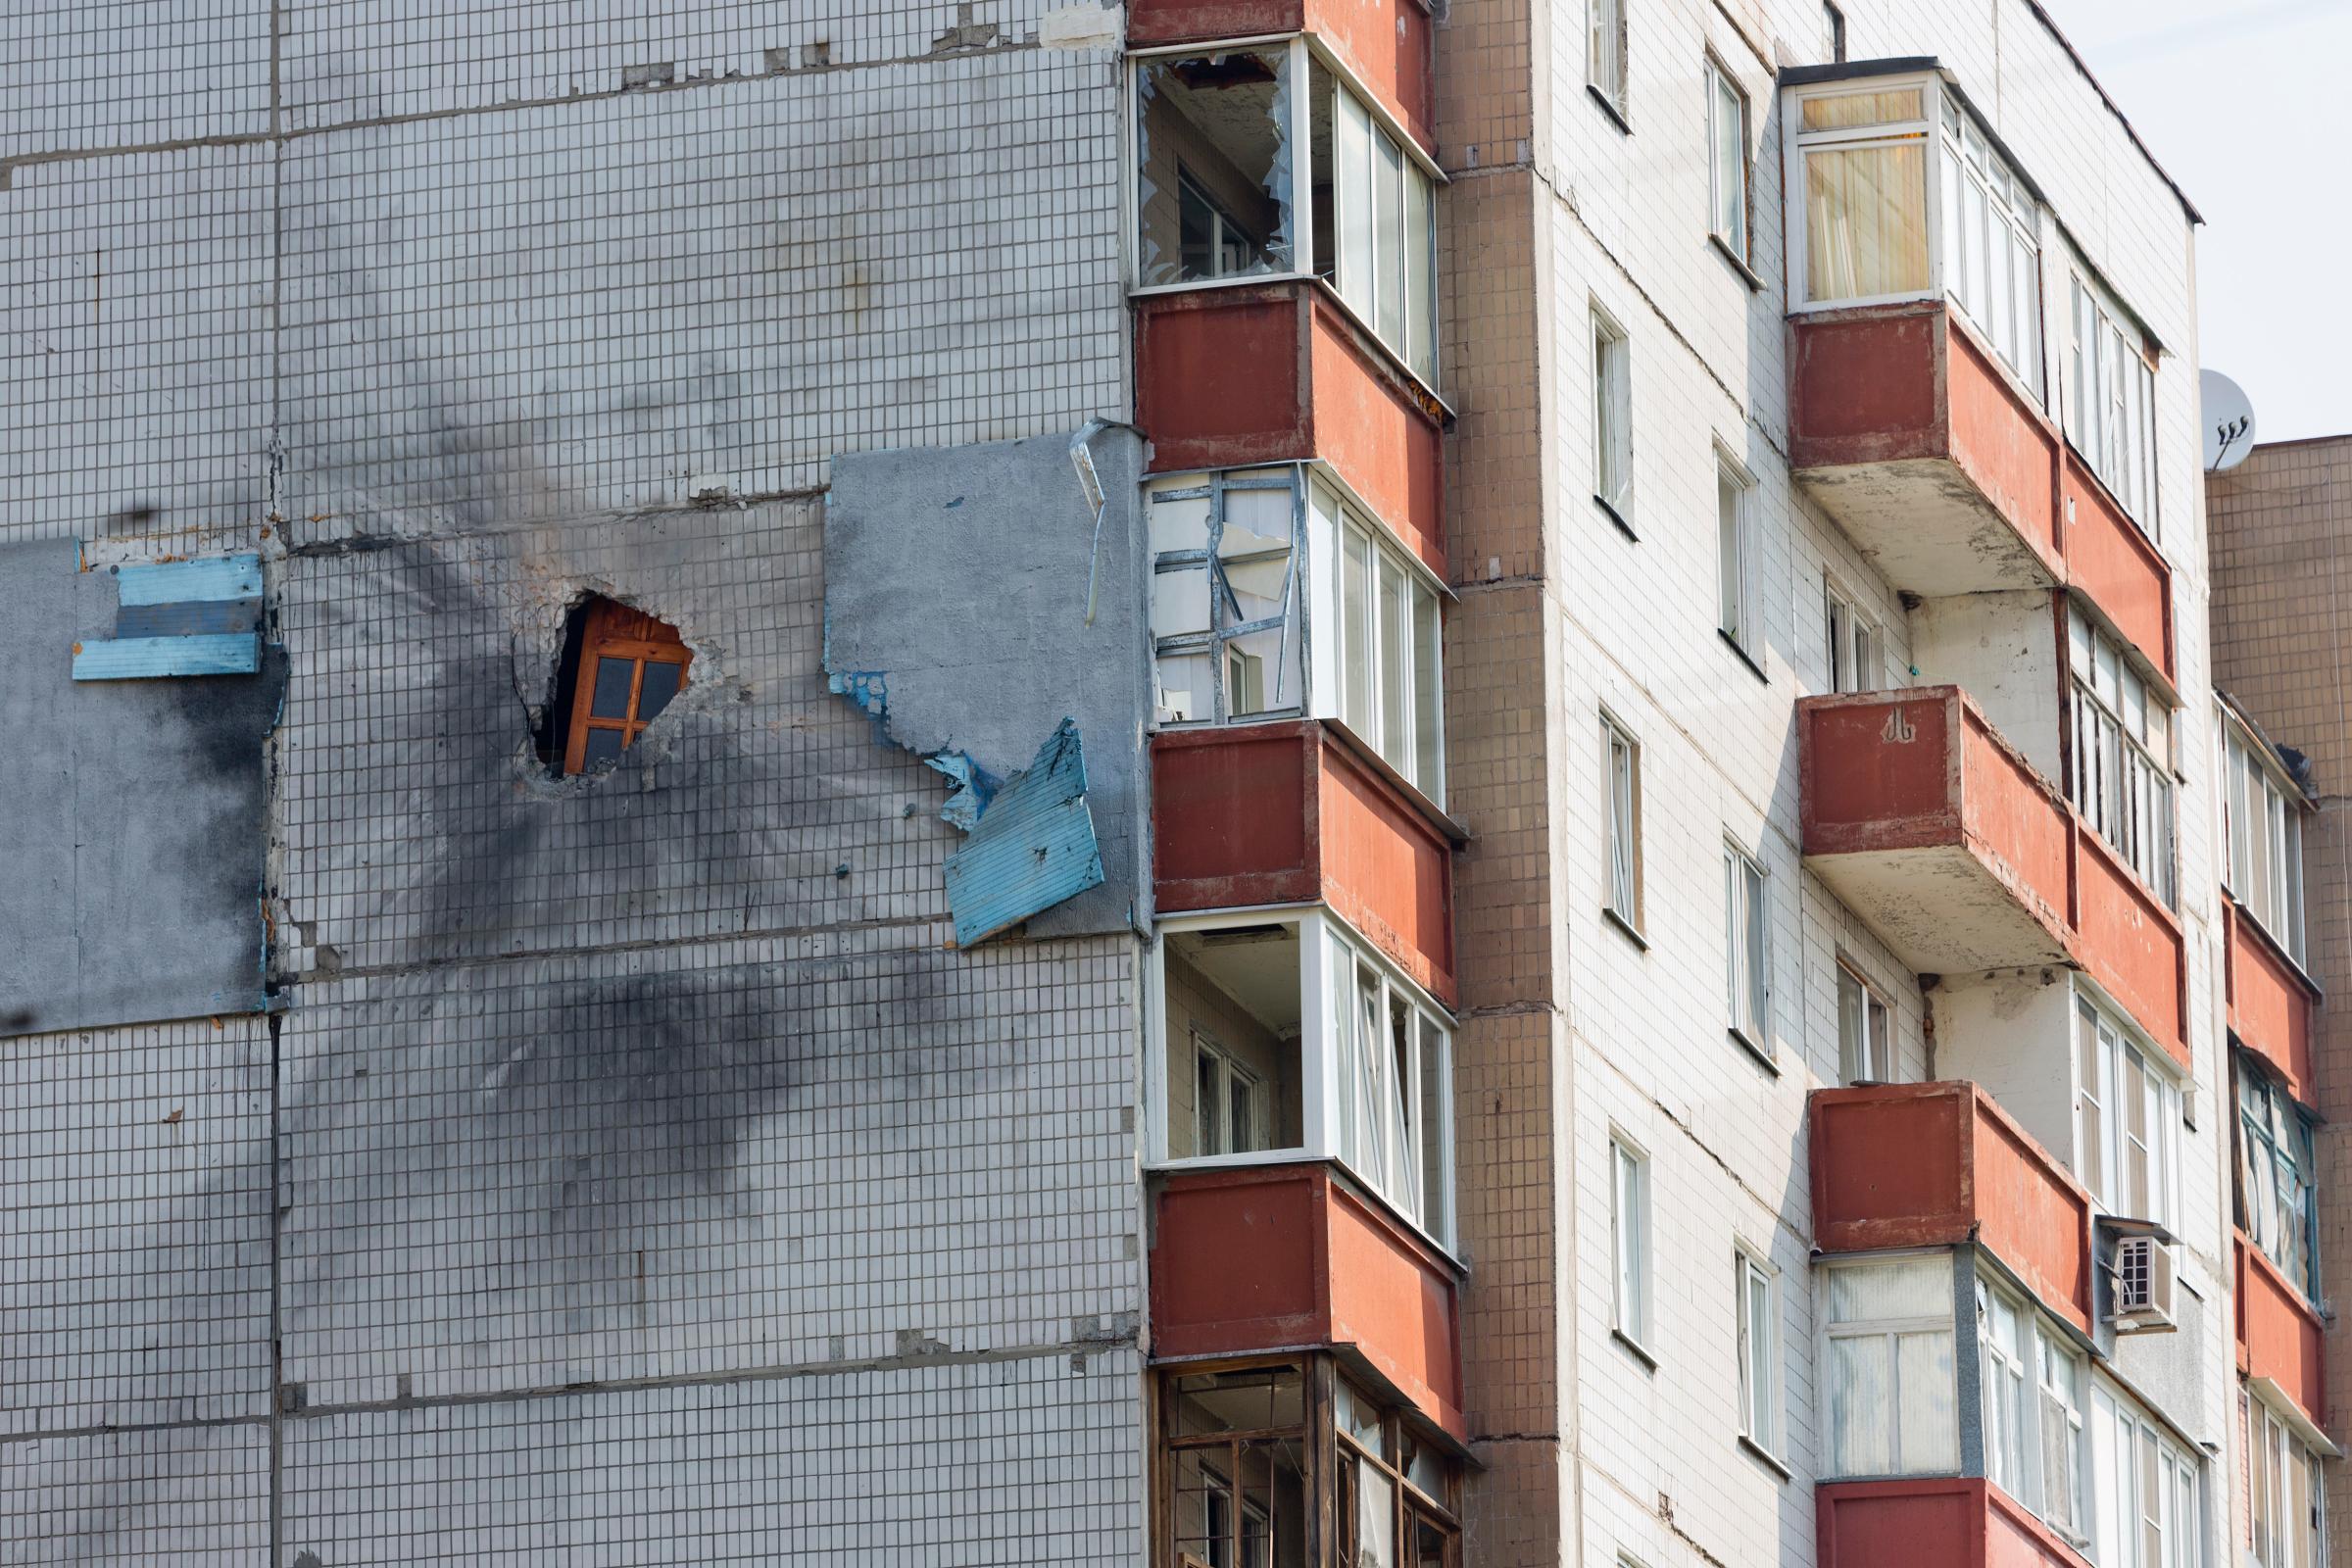 Shells damage a residential building on August 11, 2014 in Donetsk, Ukraine.